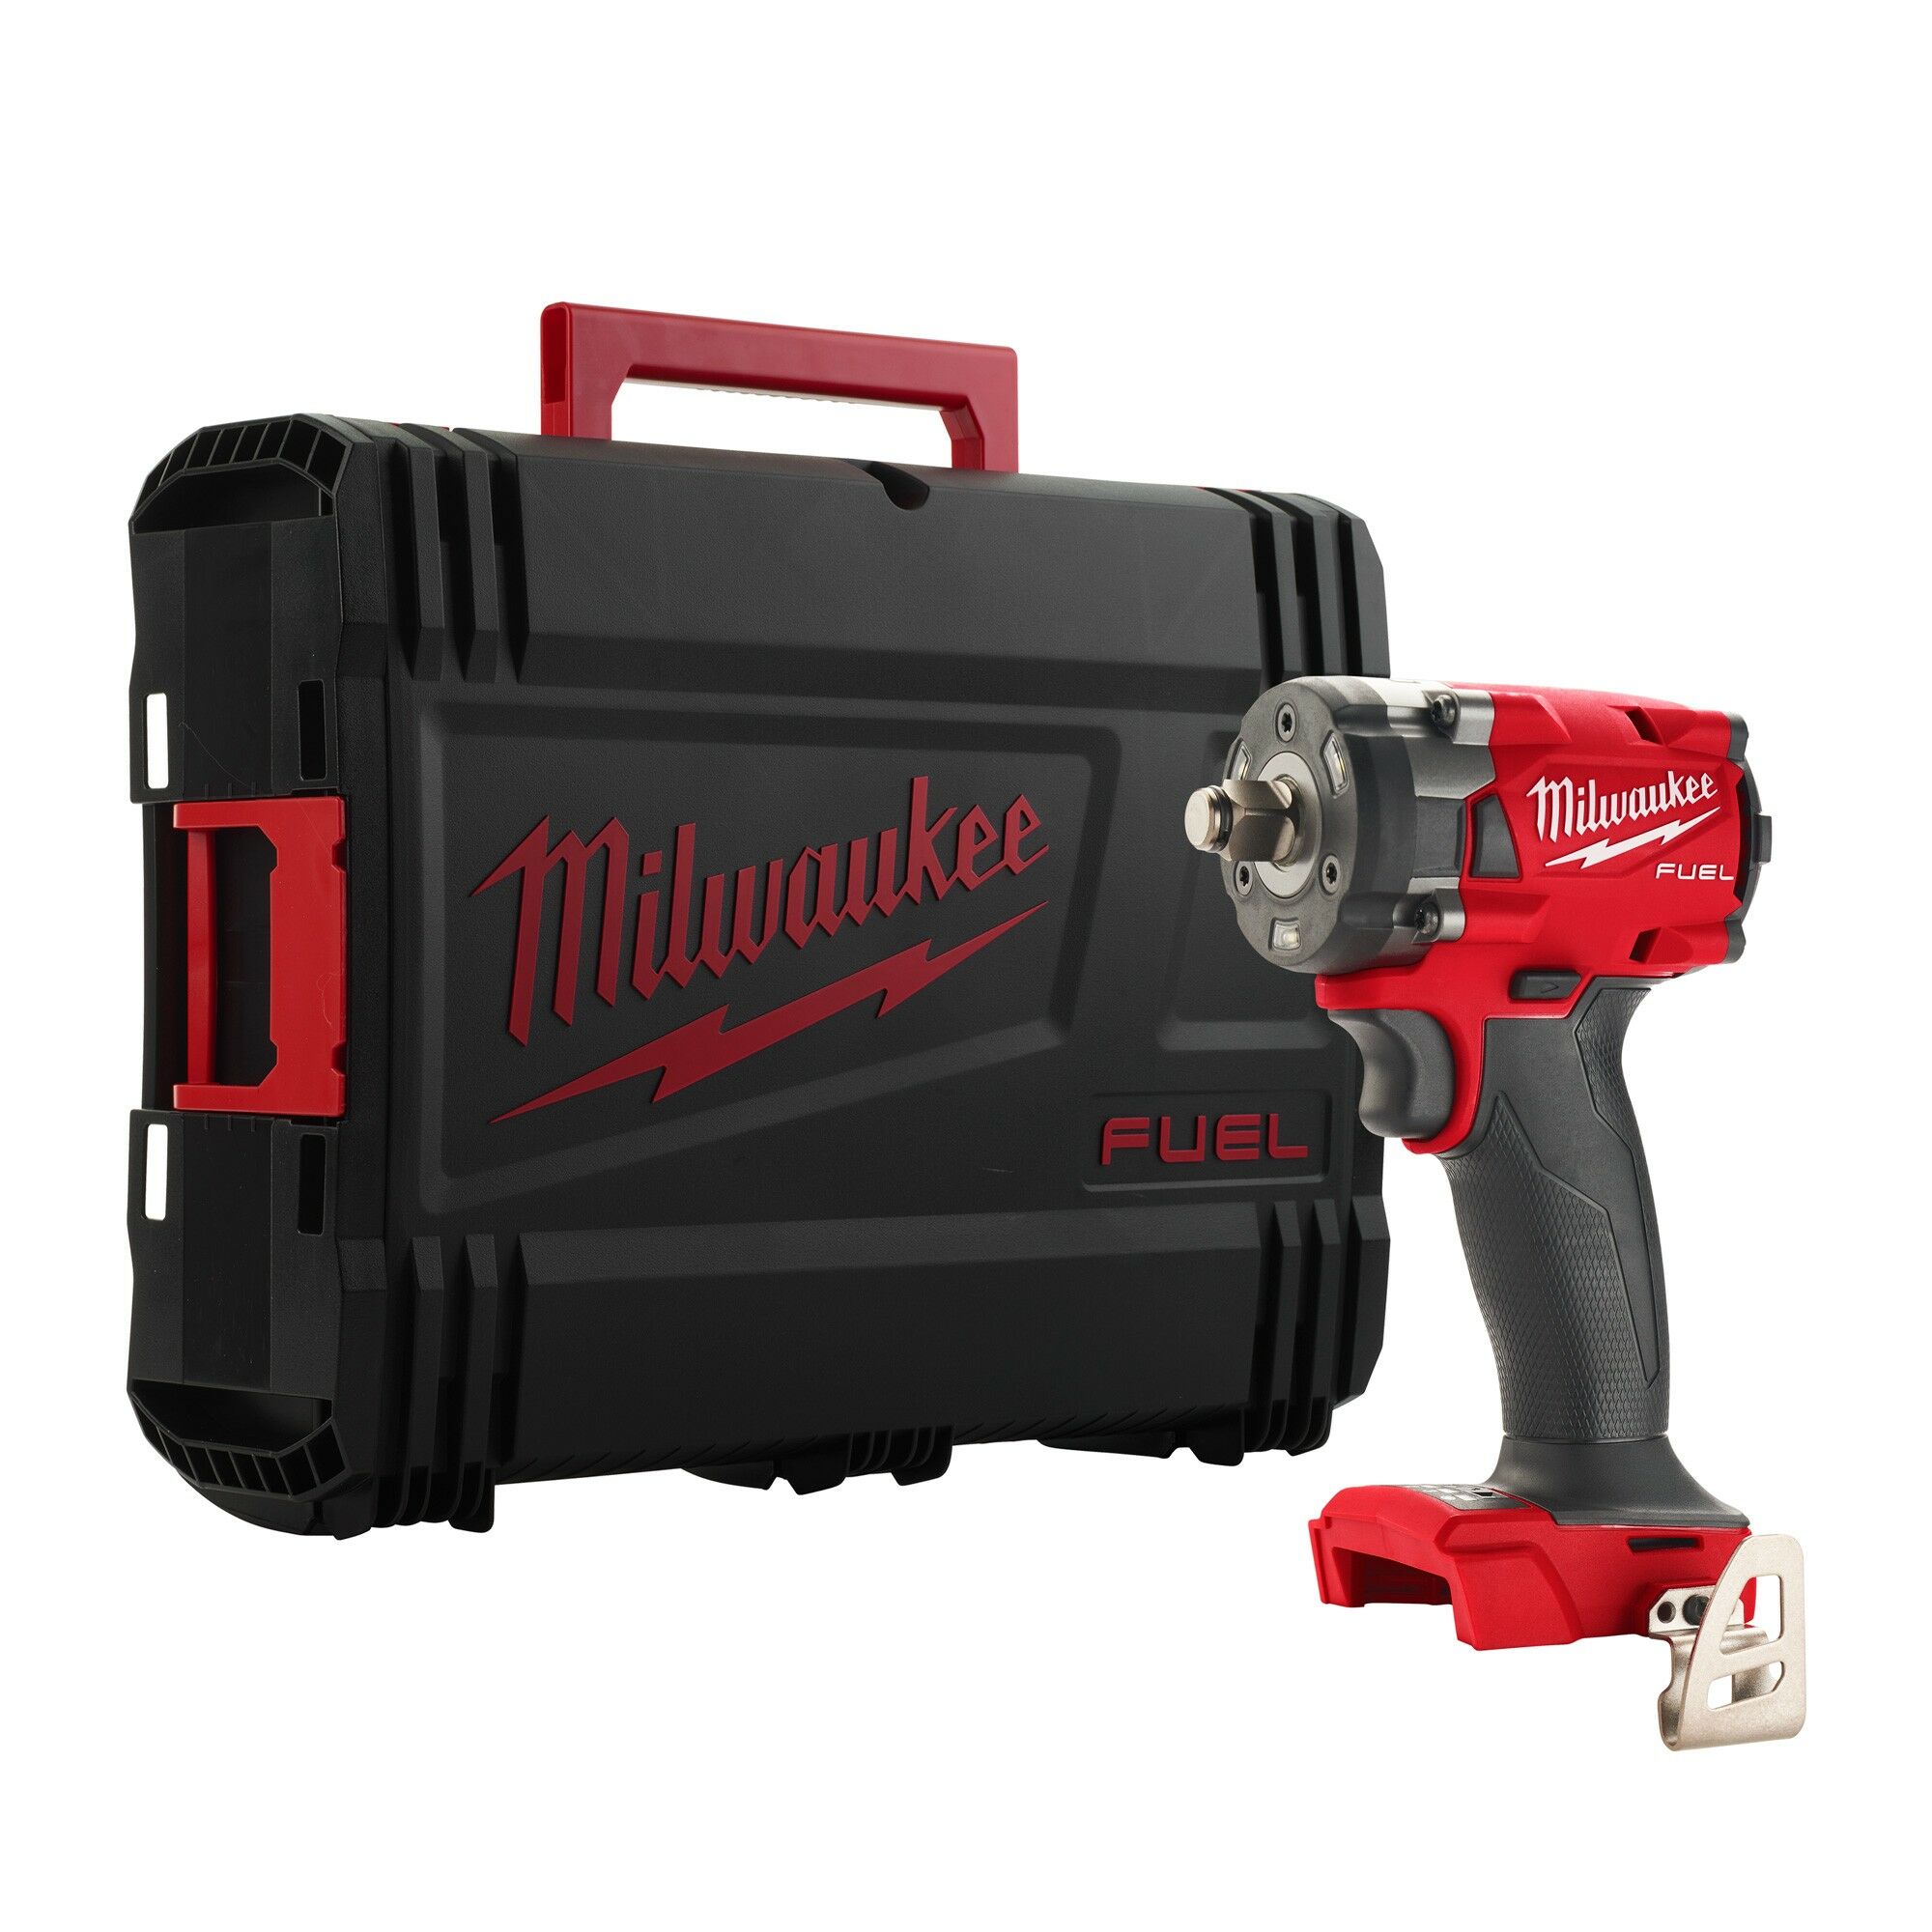 Milwaukee M18FIW2F12-0X M18 FUEL™ 18V 1/2" 339Nm Impact Wrench (Body Only) with Case